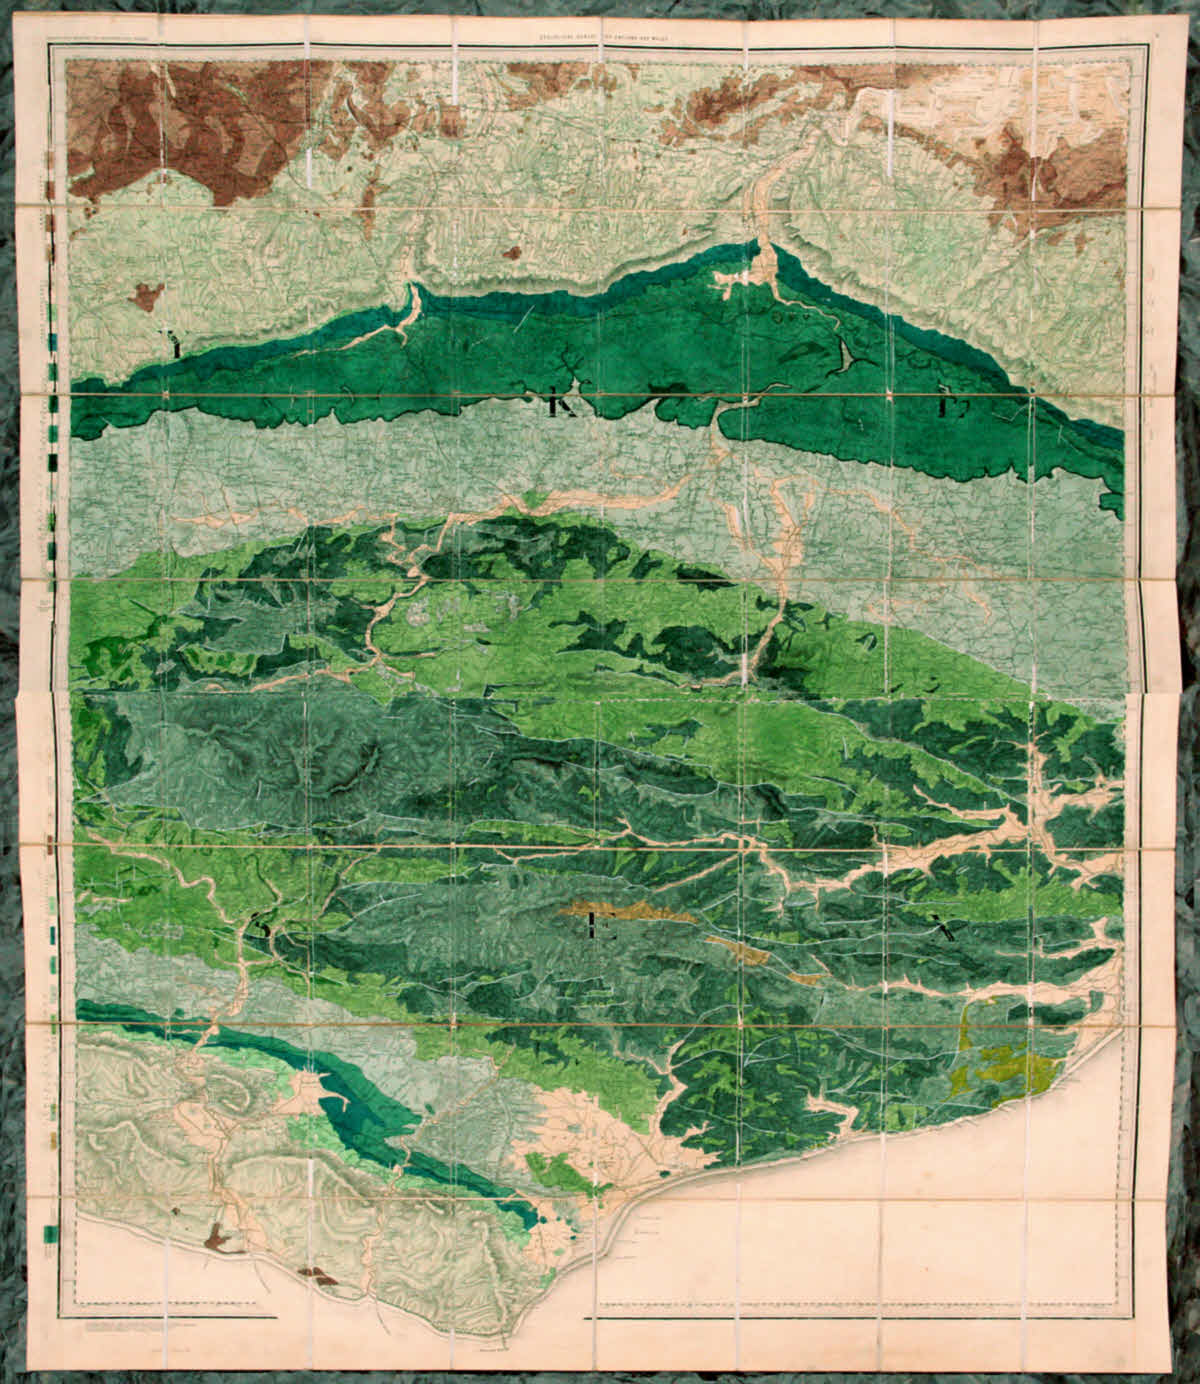 Geological map of Sussex